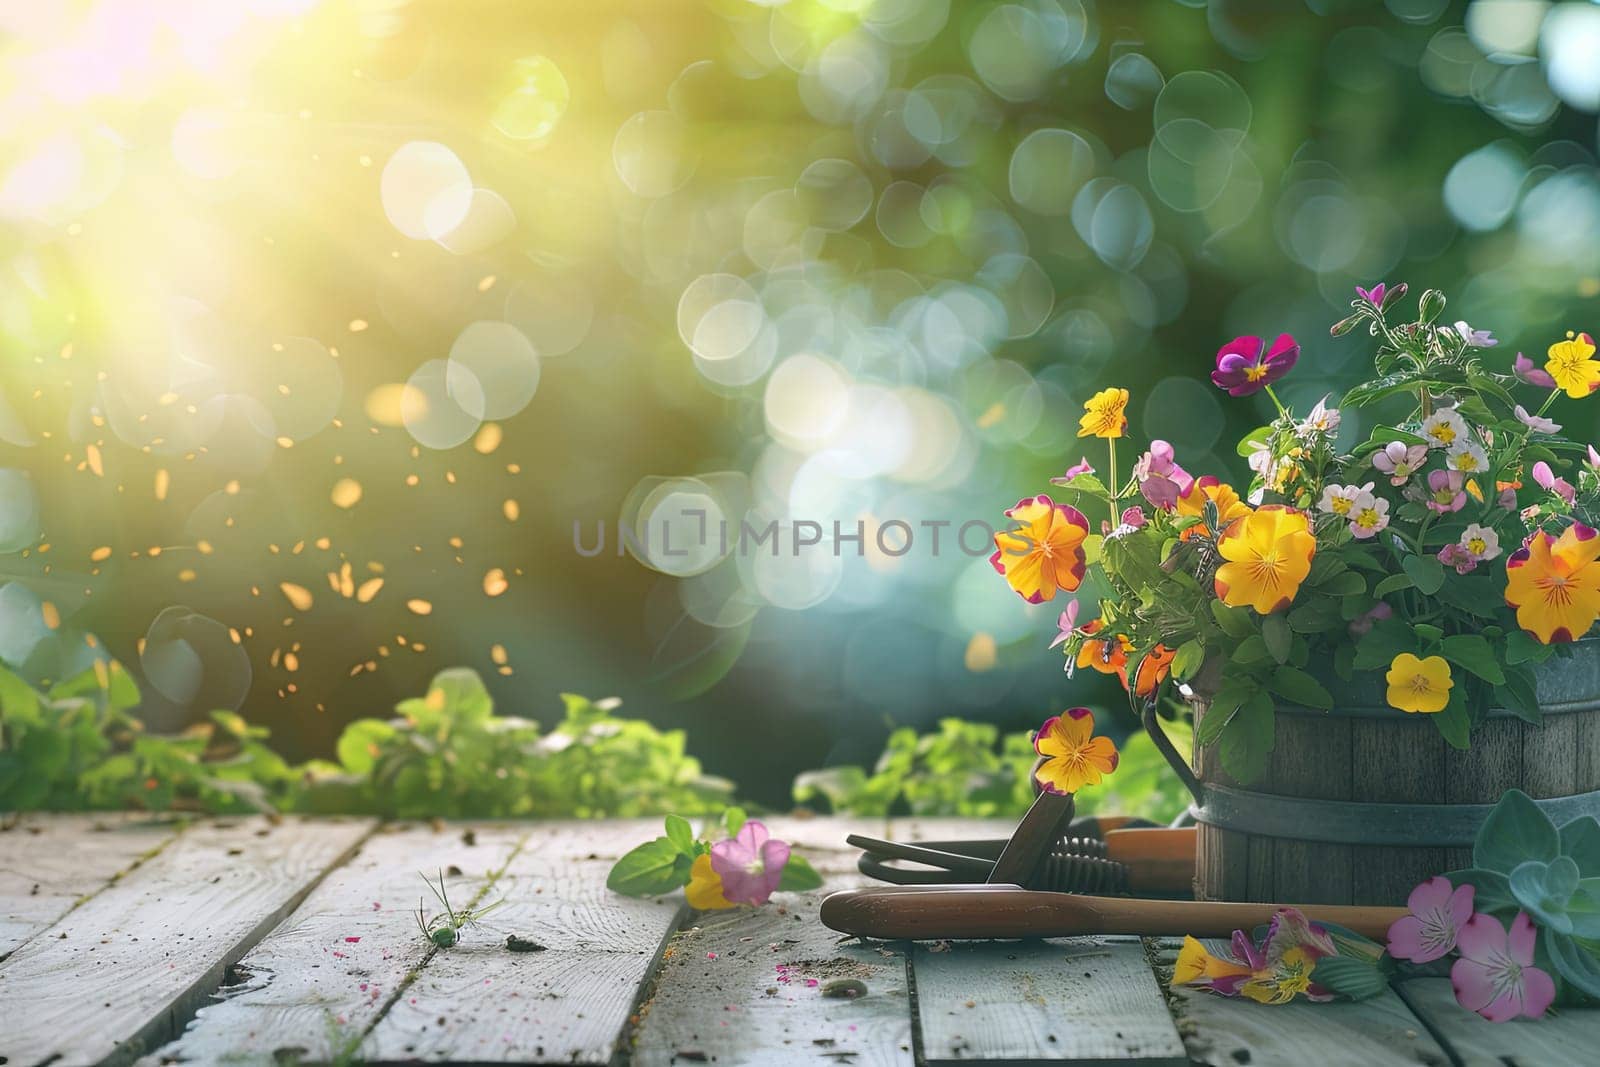 Various colorful flowers arranged on a wooden table with garden tools, against a blurred natural background.